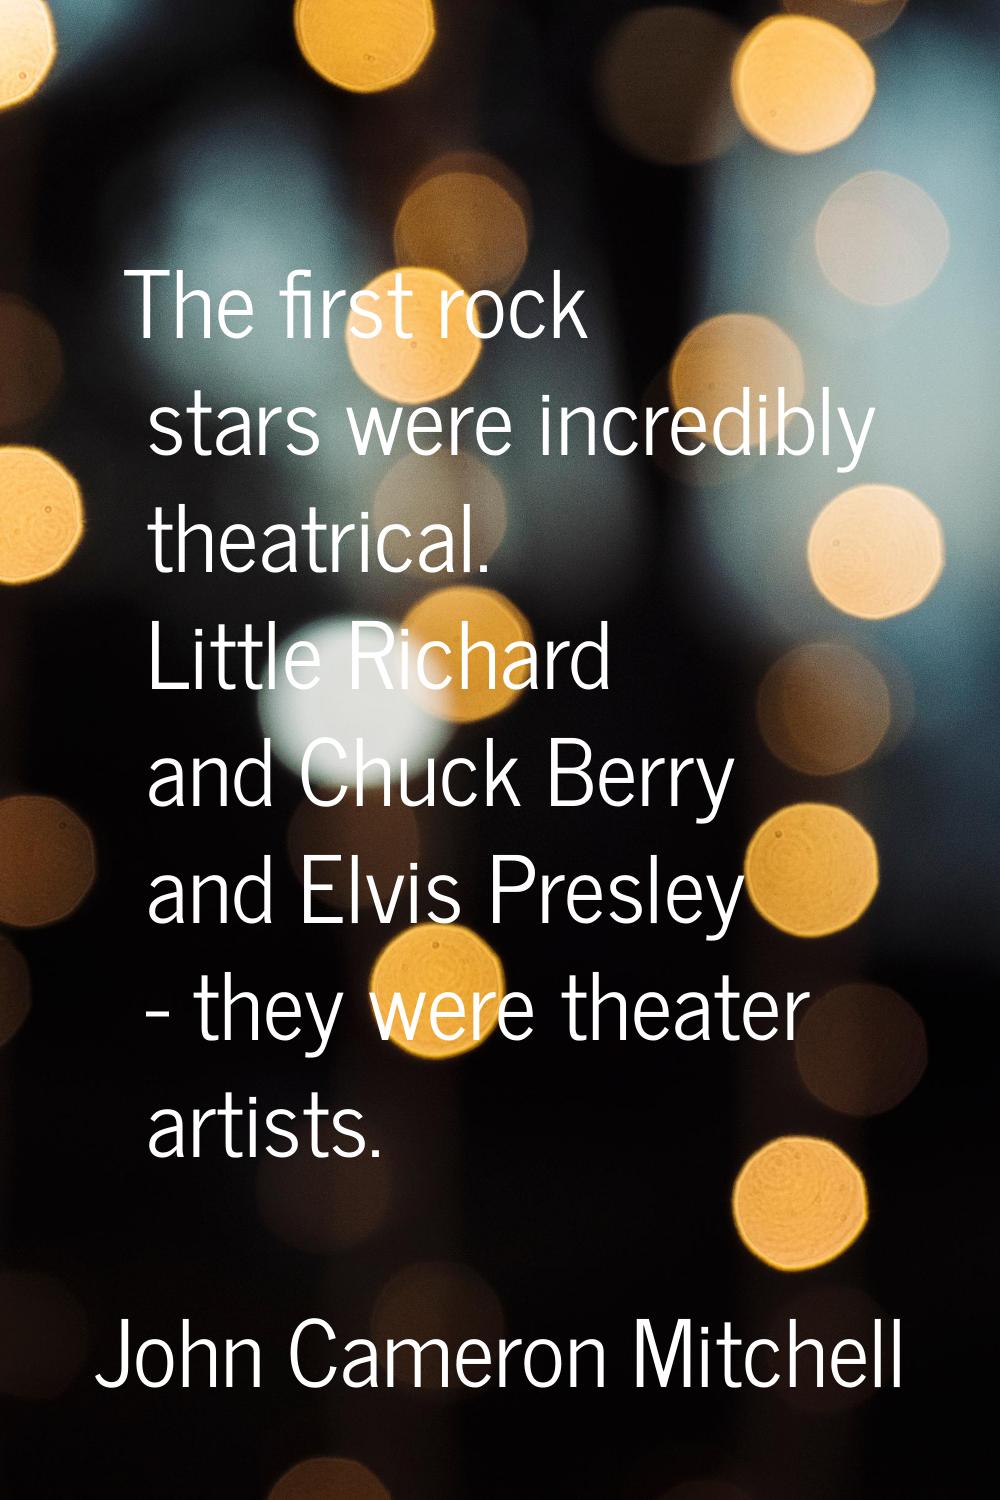 The first rock stars were incredibly theatrical. Little Richard and Chuck Berry and Elvis Presley -